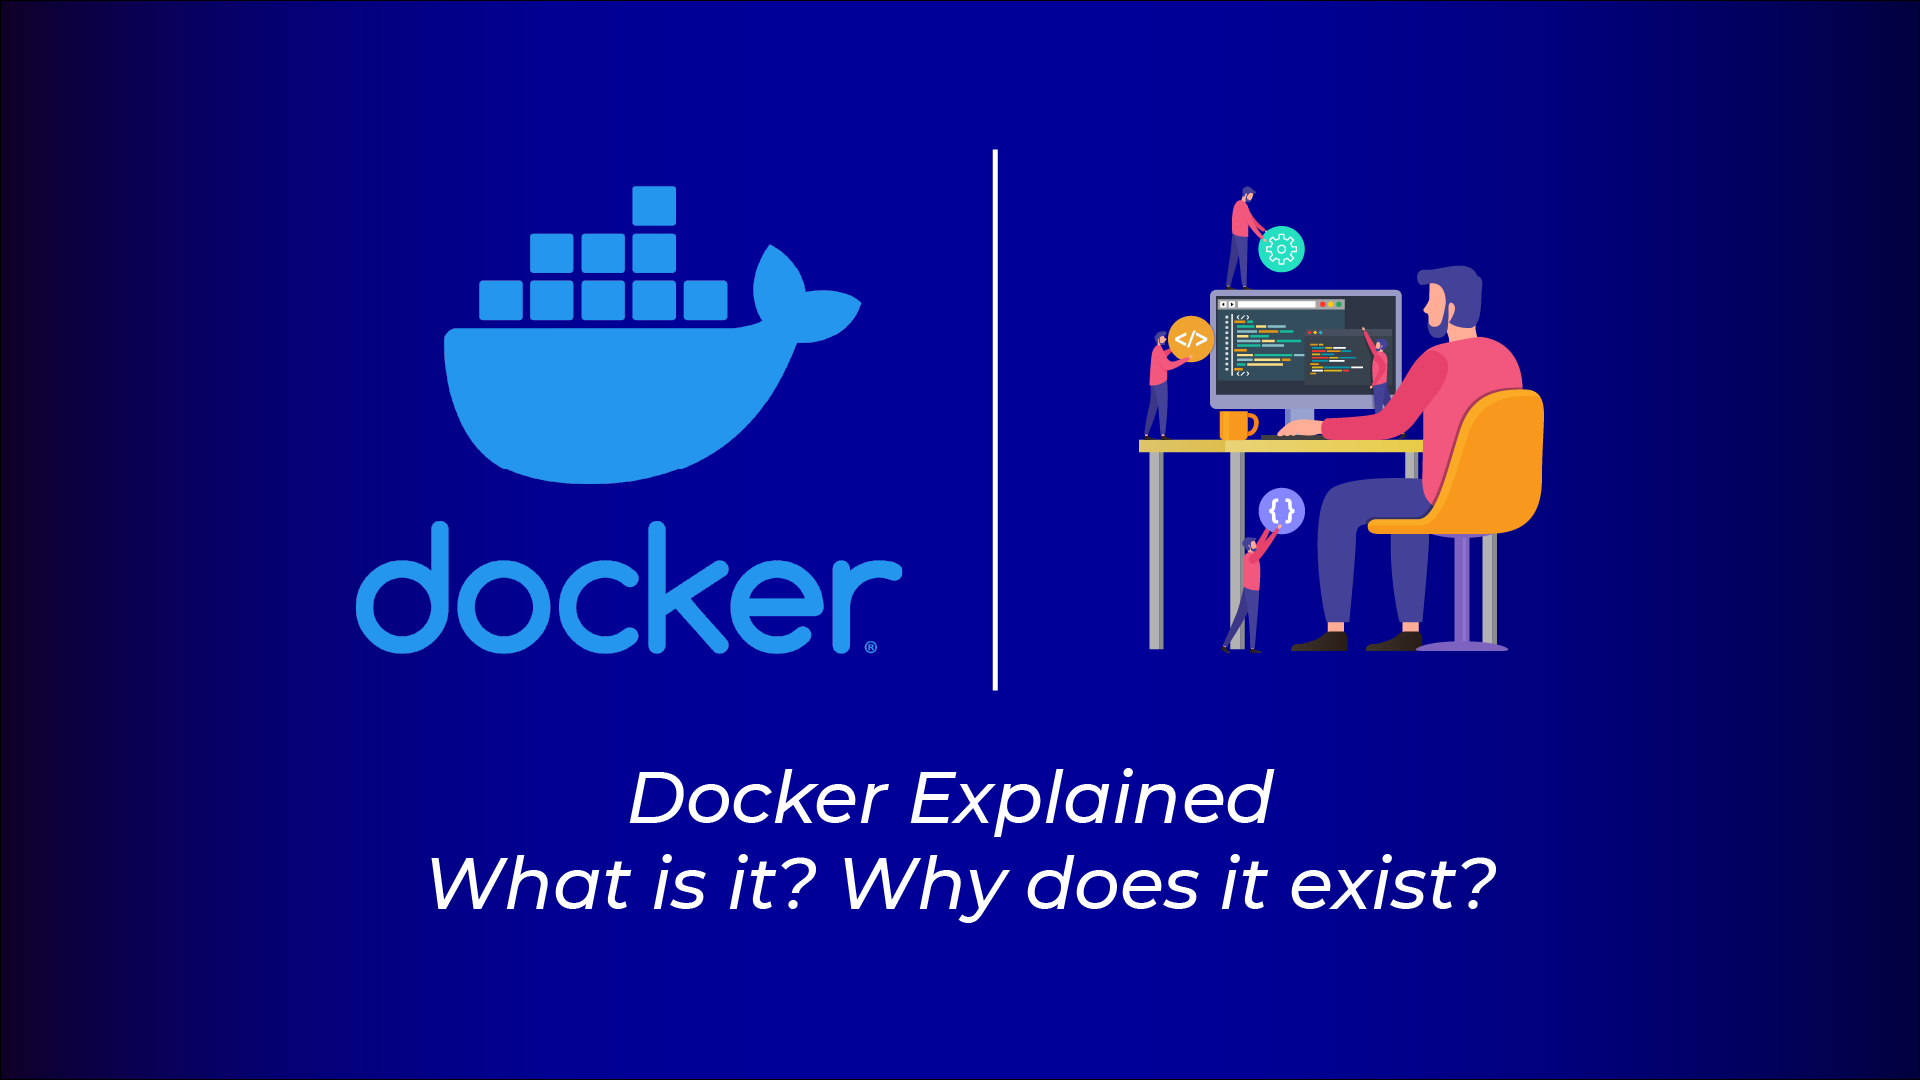 Docker Explained: What is it? Why does it exist?